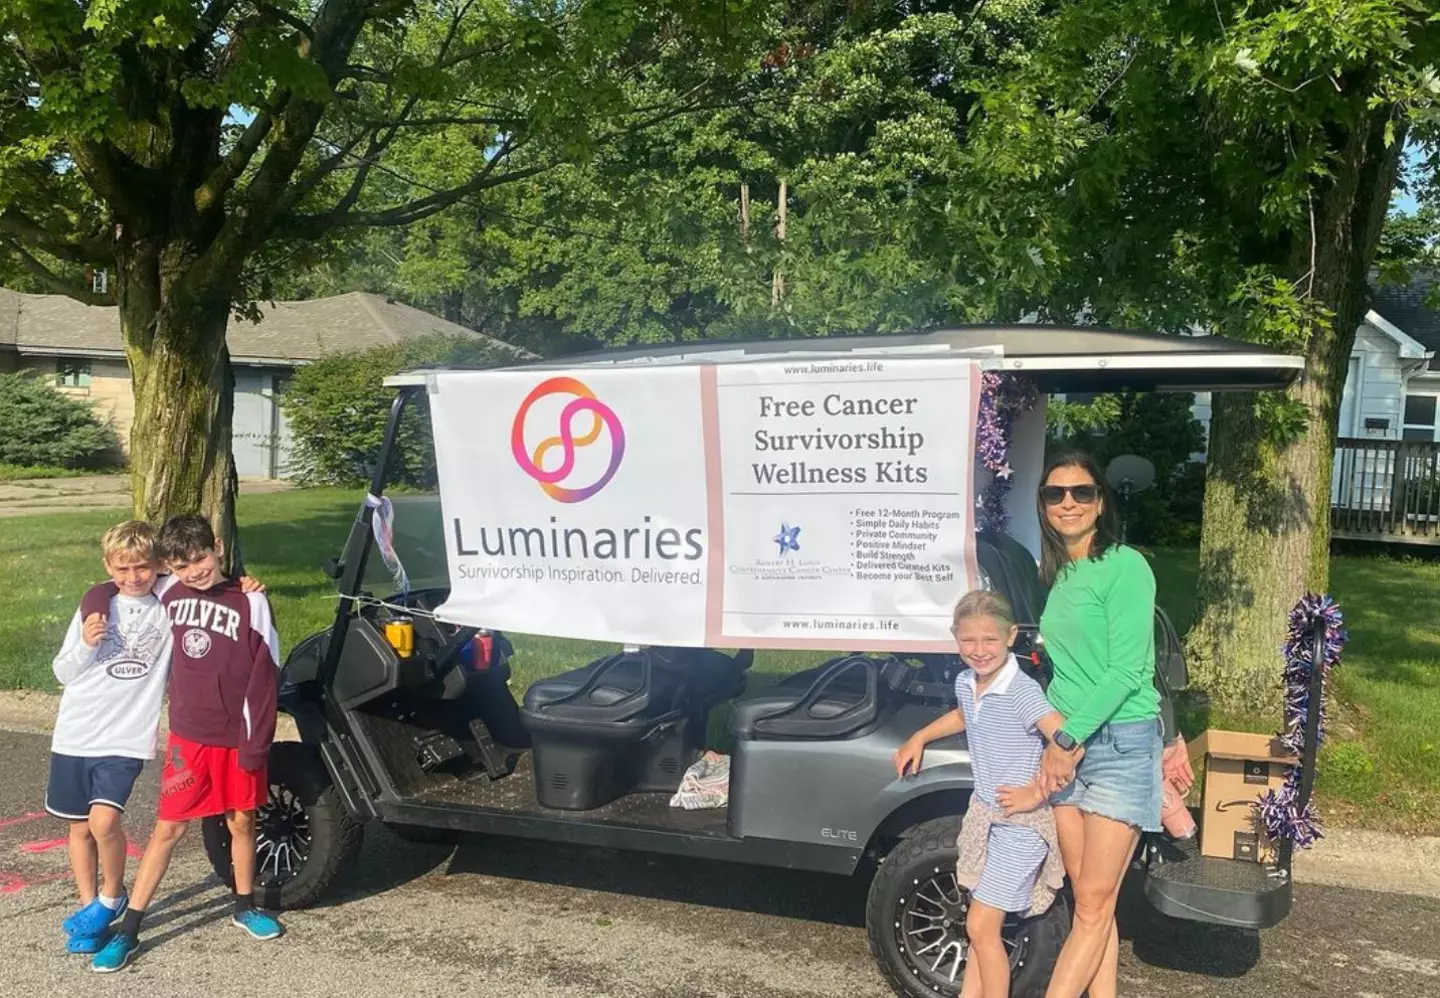 Since her fight with cancer, Laura set up Luminaries Life to help others in the same situation.